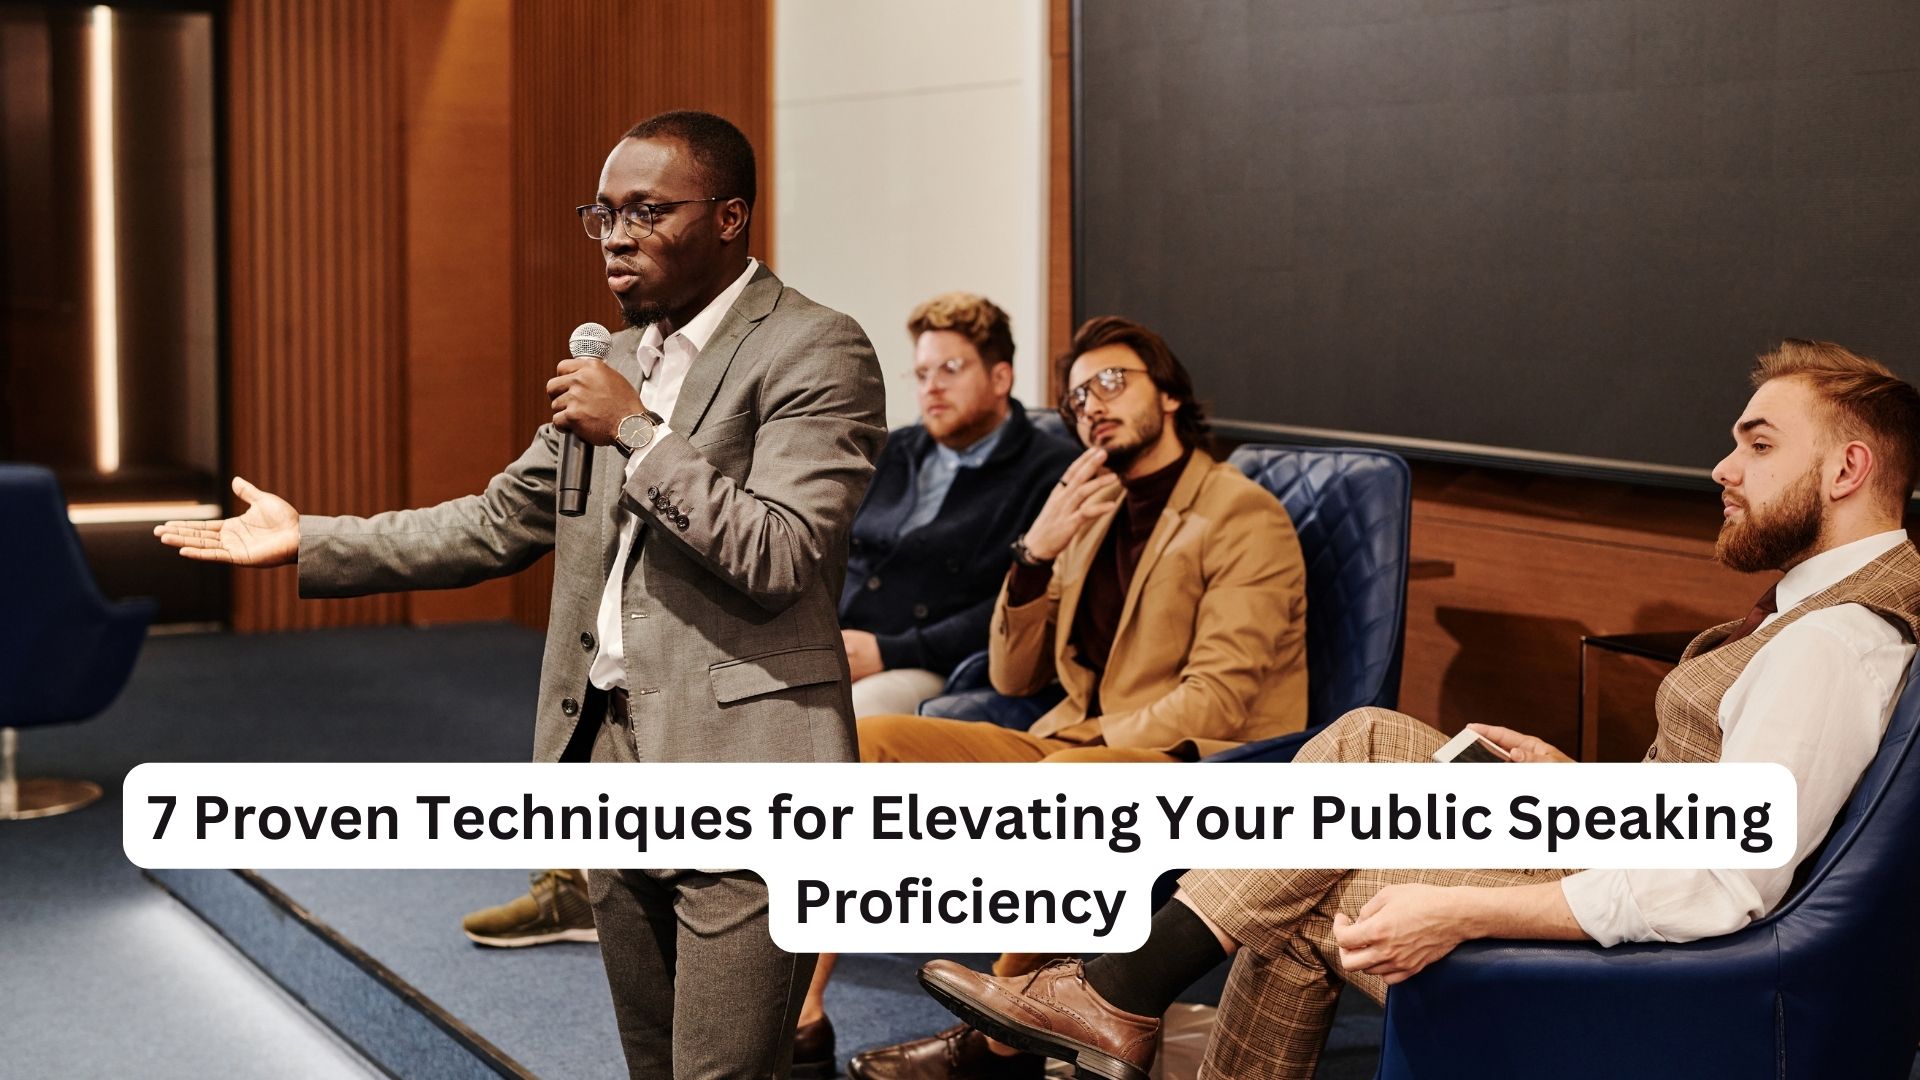 7 Proven Techniques for Elevating Your Public Speaking Proficiency